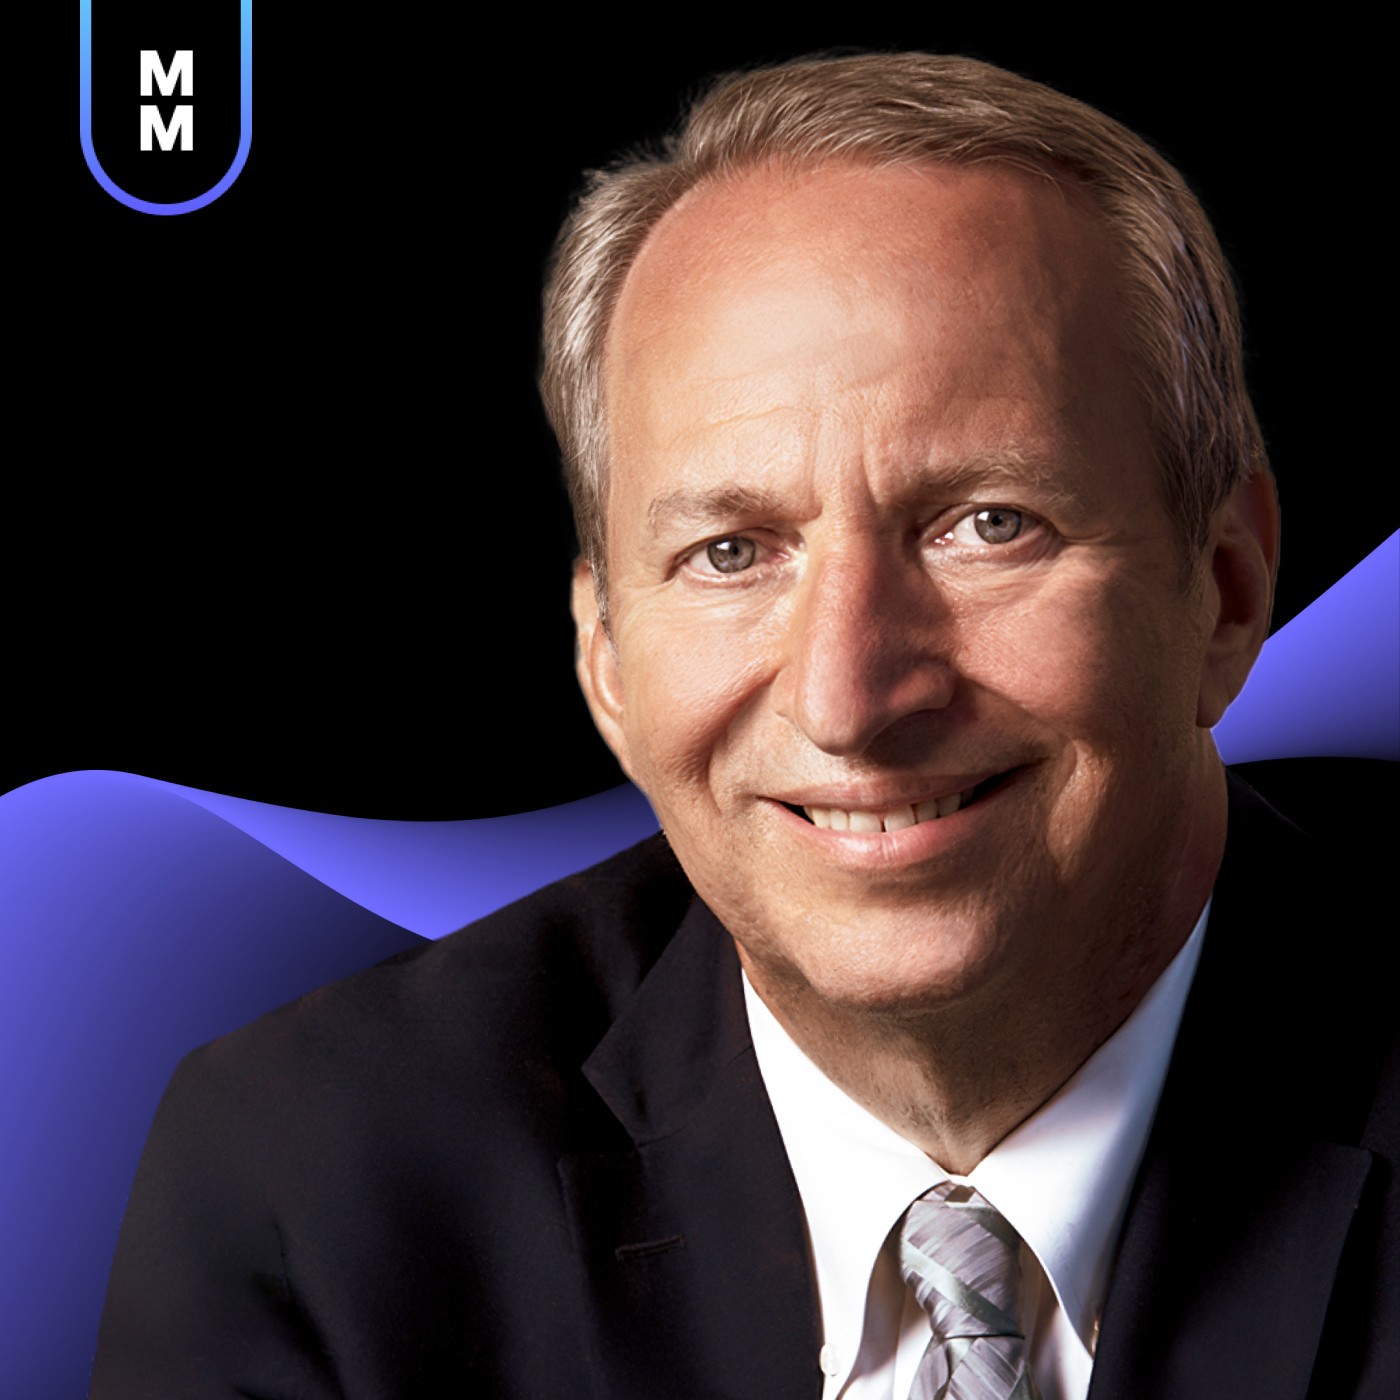 Ep 75 | Principles of Financial Regulation with Lawrence H. Summers of Harvard University